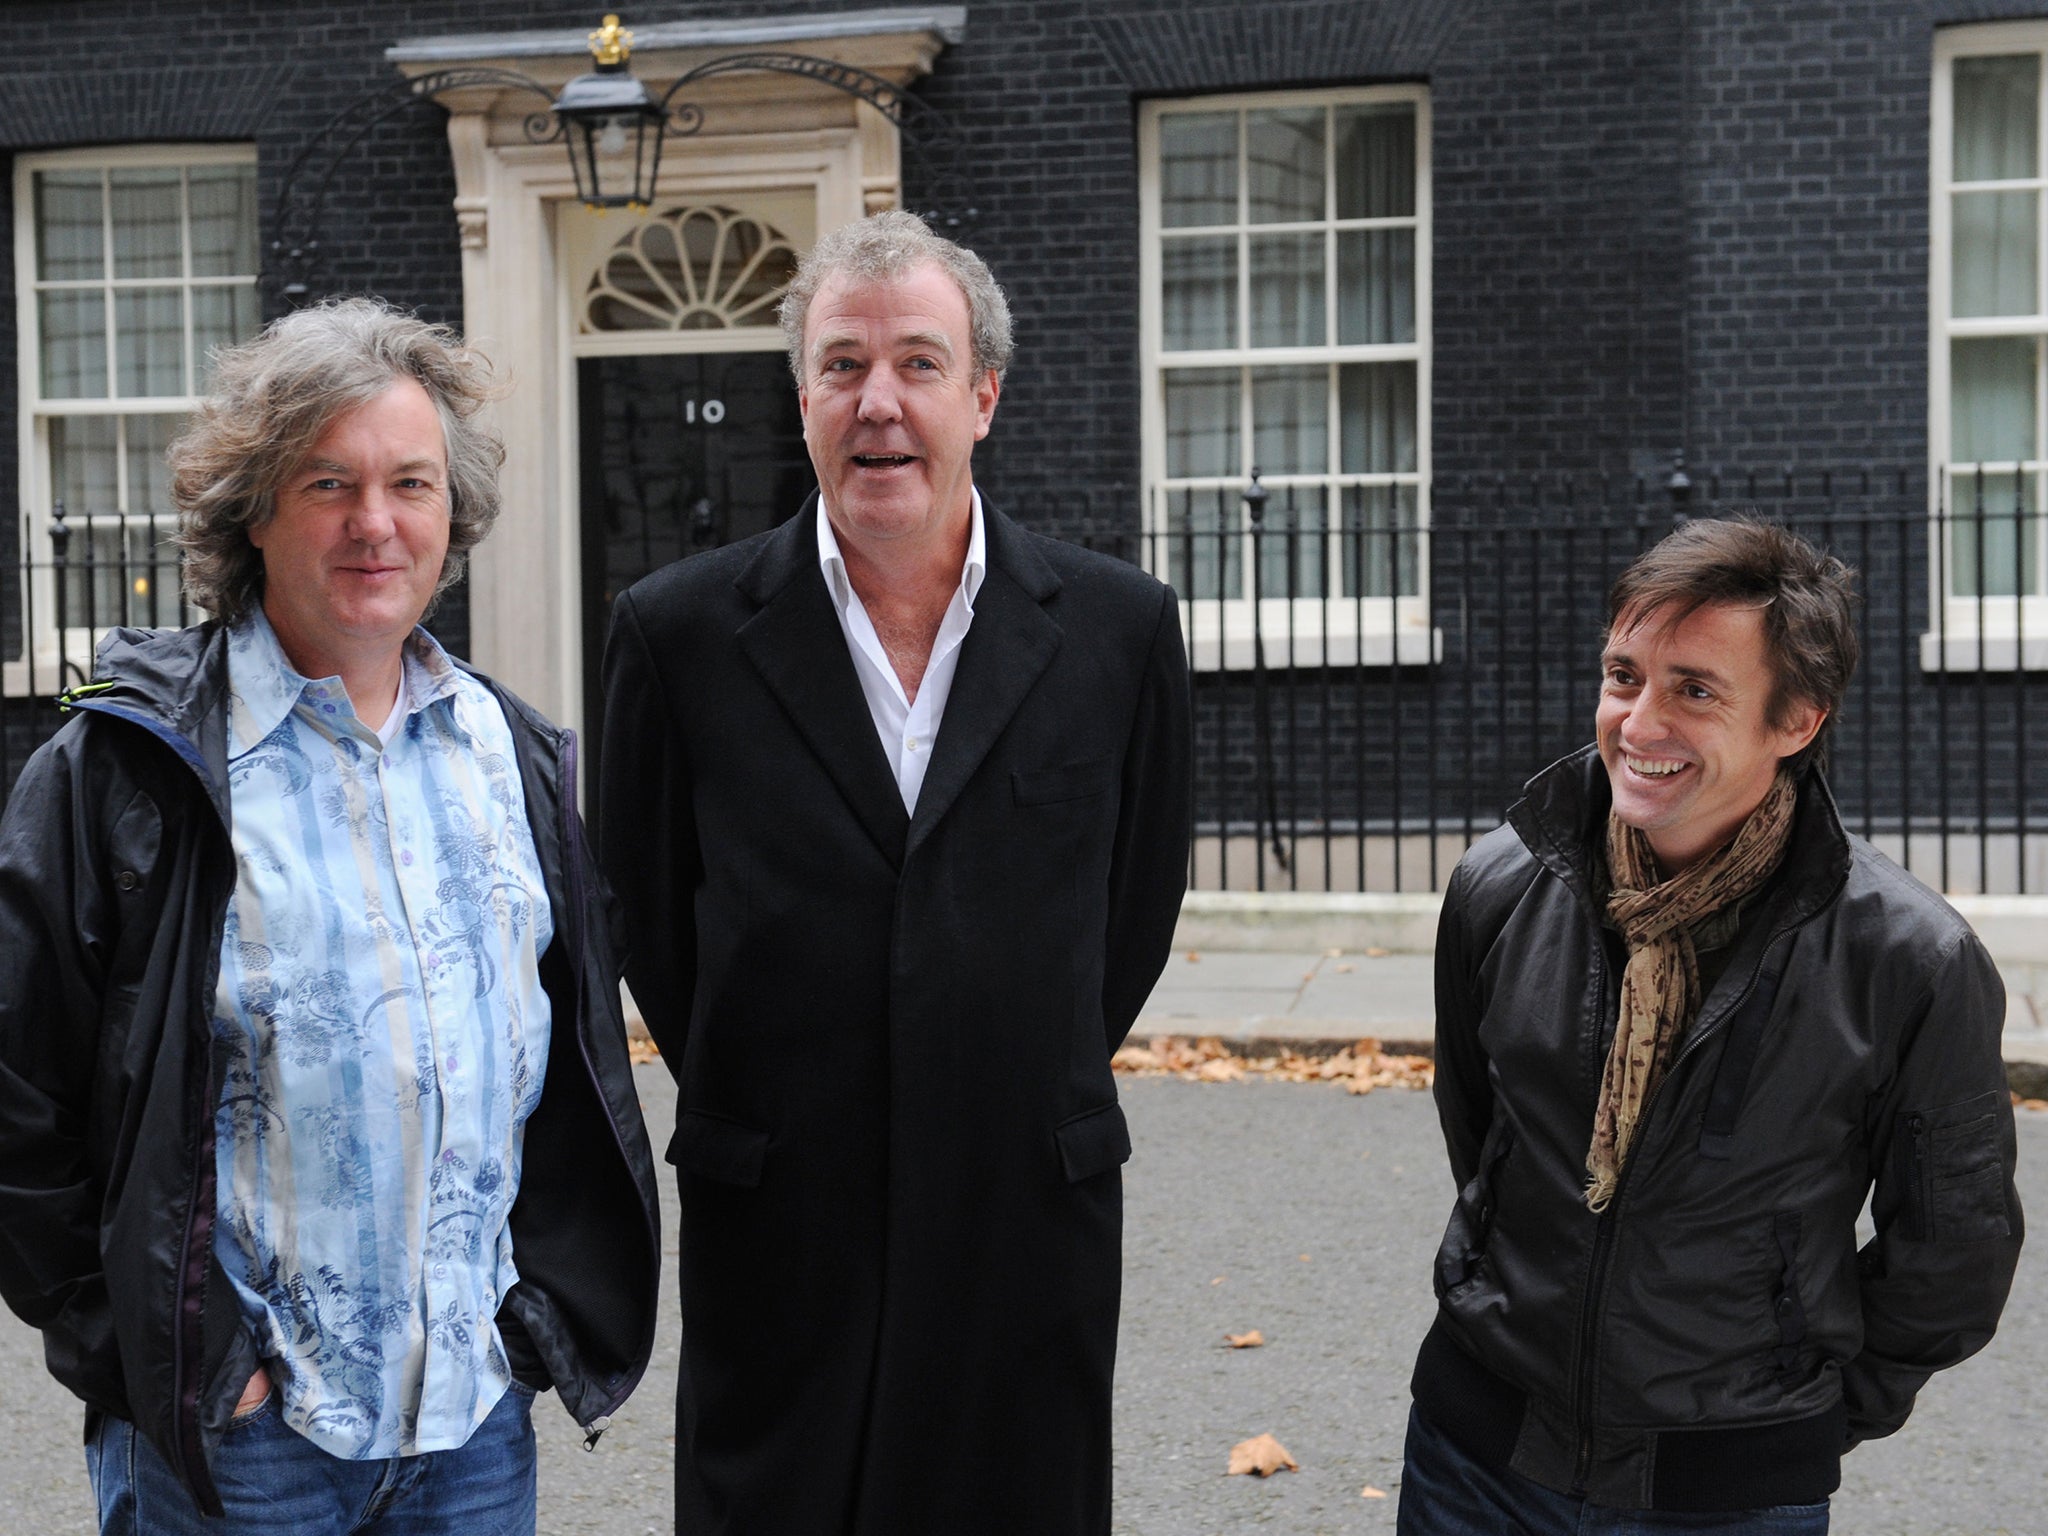 The many parallels between an ailing Tory government and Top Gear